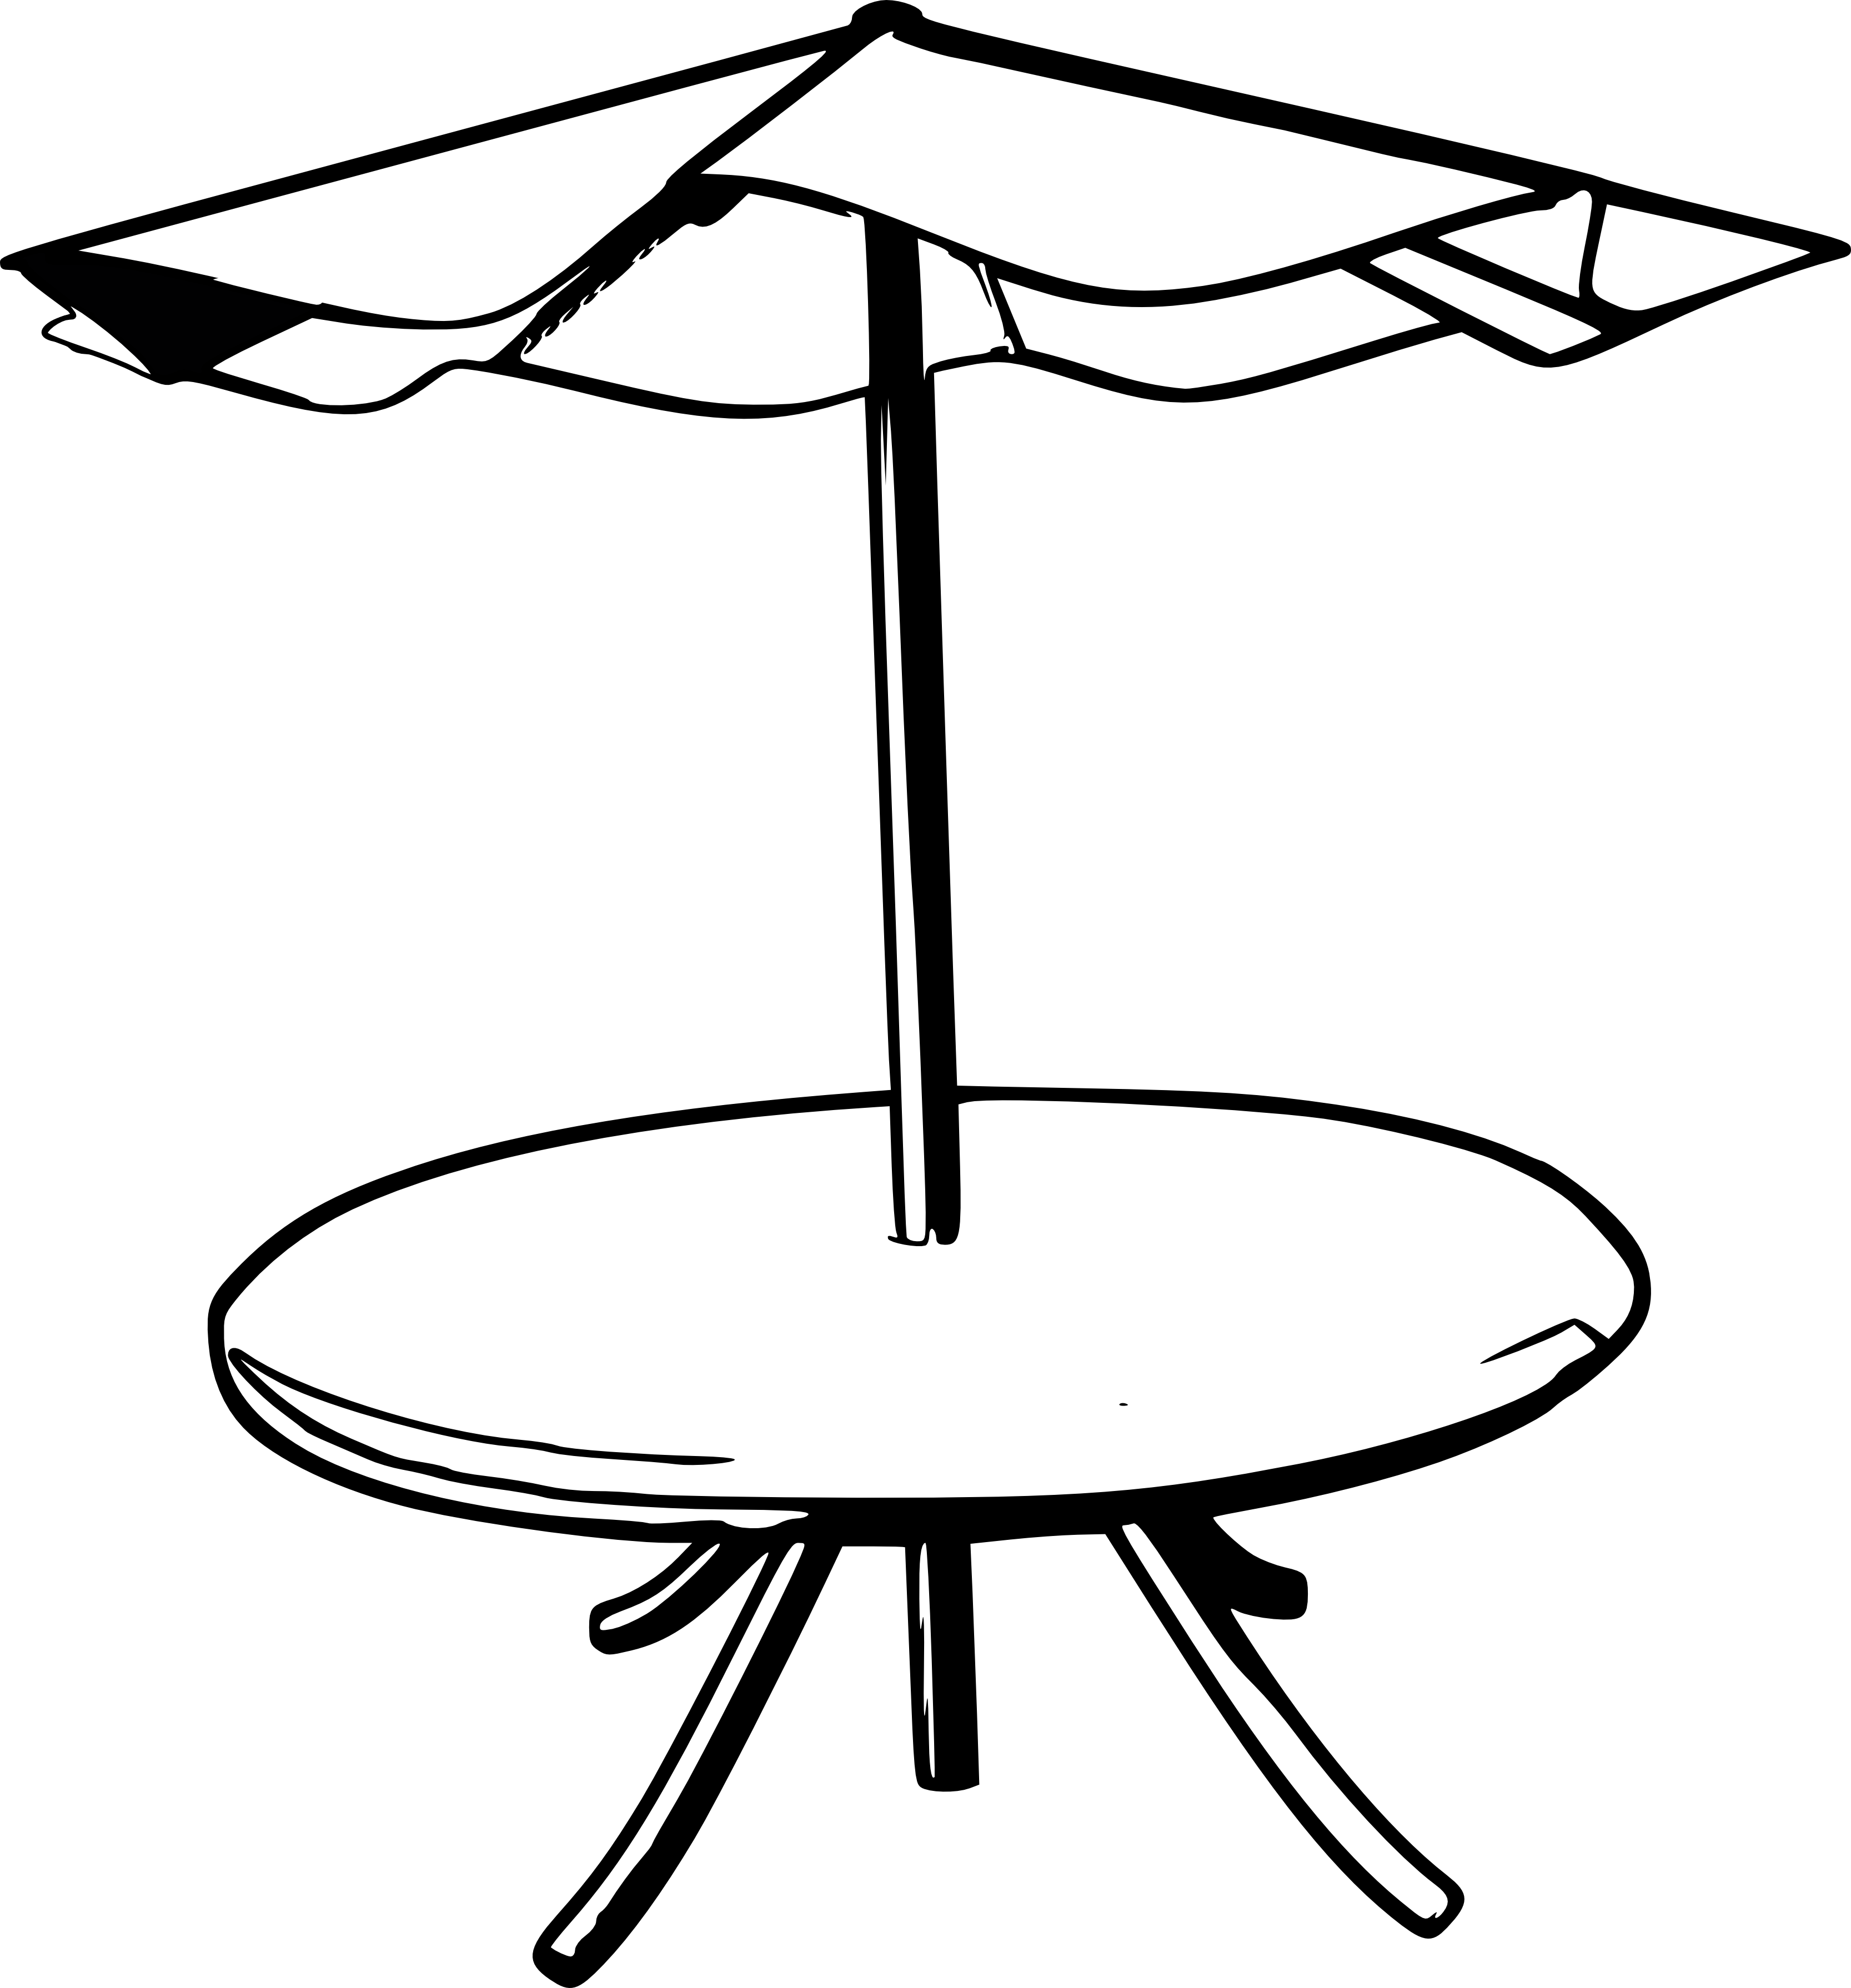 Jumping clipart black and white. Umbrella table 